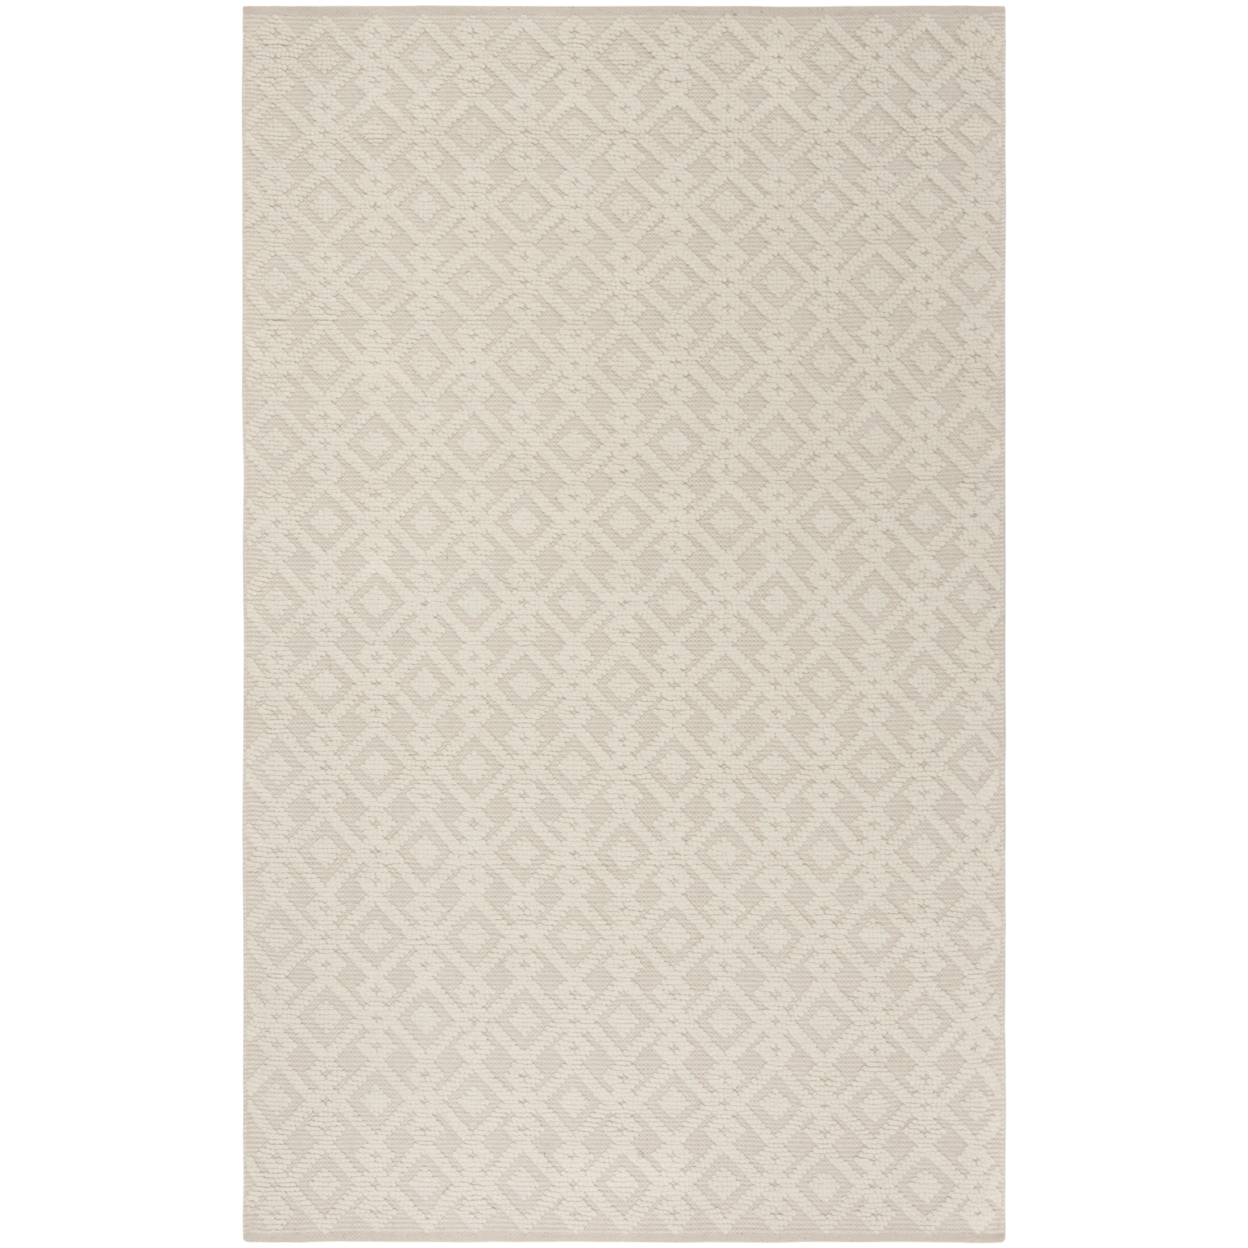 SAFAVIEH Vermont Collection VRM102A Handwoven Ivory Rug - 5 X 8